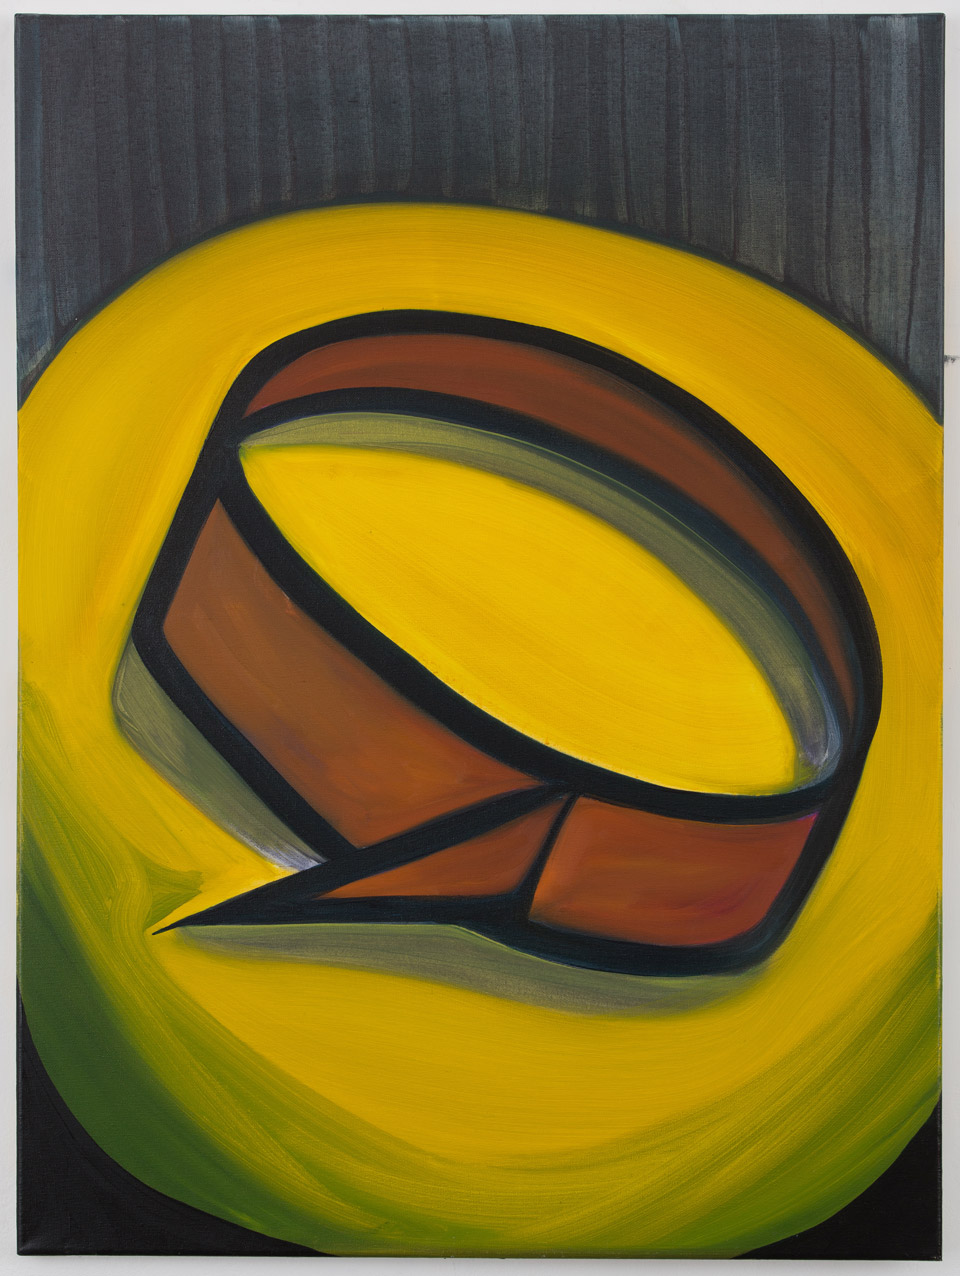 <p>A Roll of Masking Tape,2013, oil on canvas, 60 x 80 cm</p>